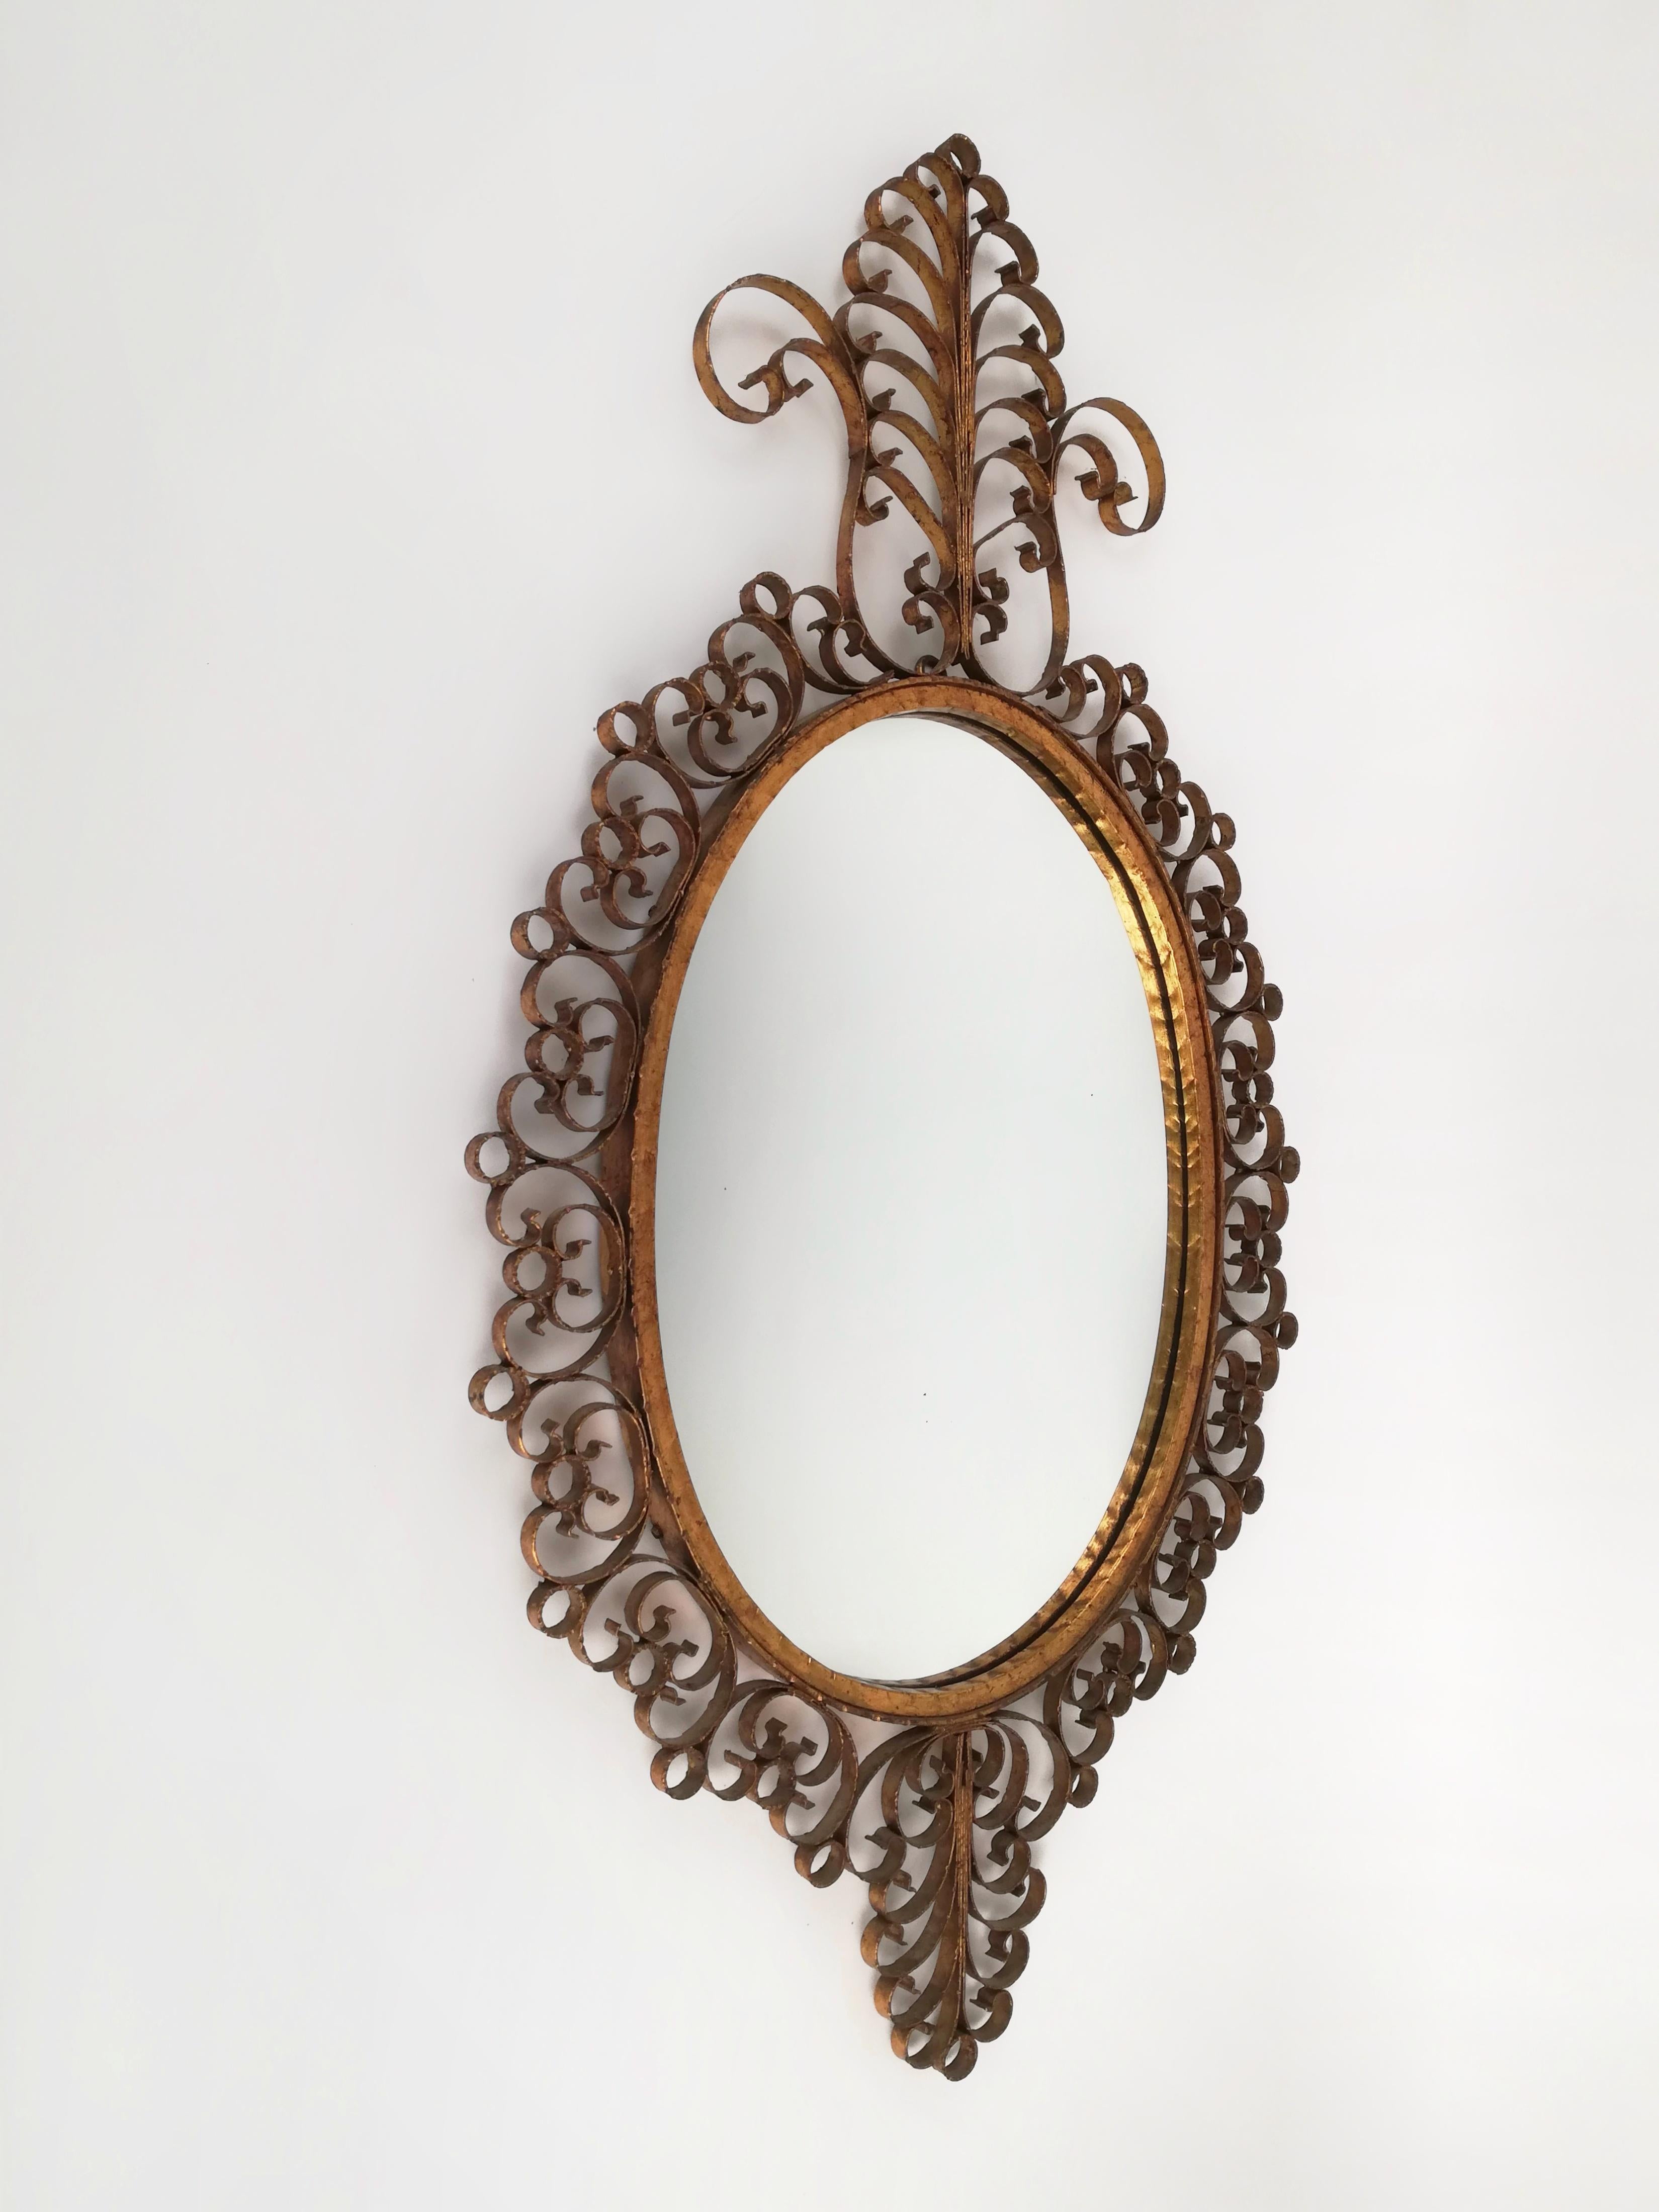 Hammered Wrought Iron Gilded Mirror in the Style of Pierluigi Colli, Italy, 1950 For Sale 8